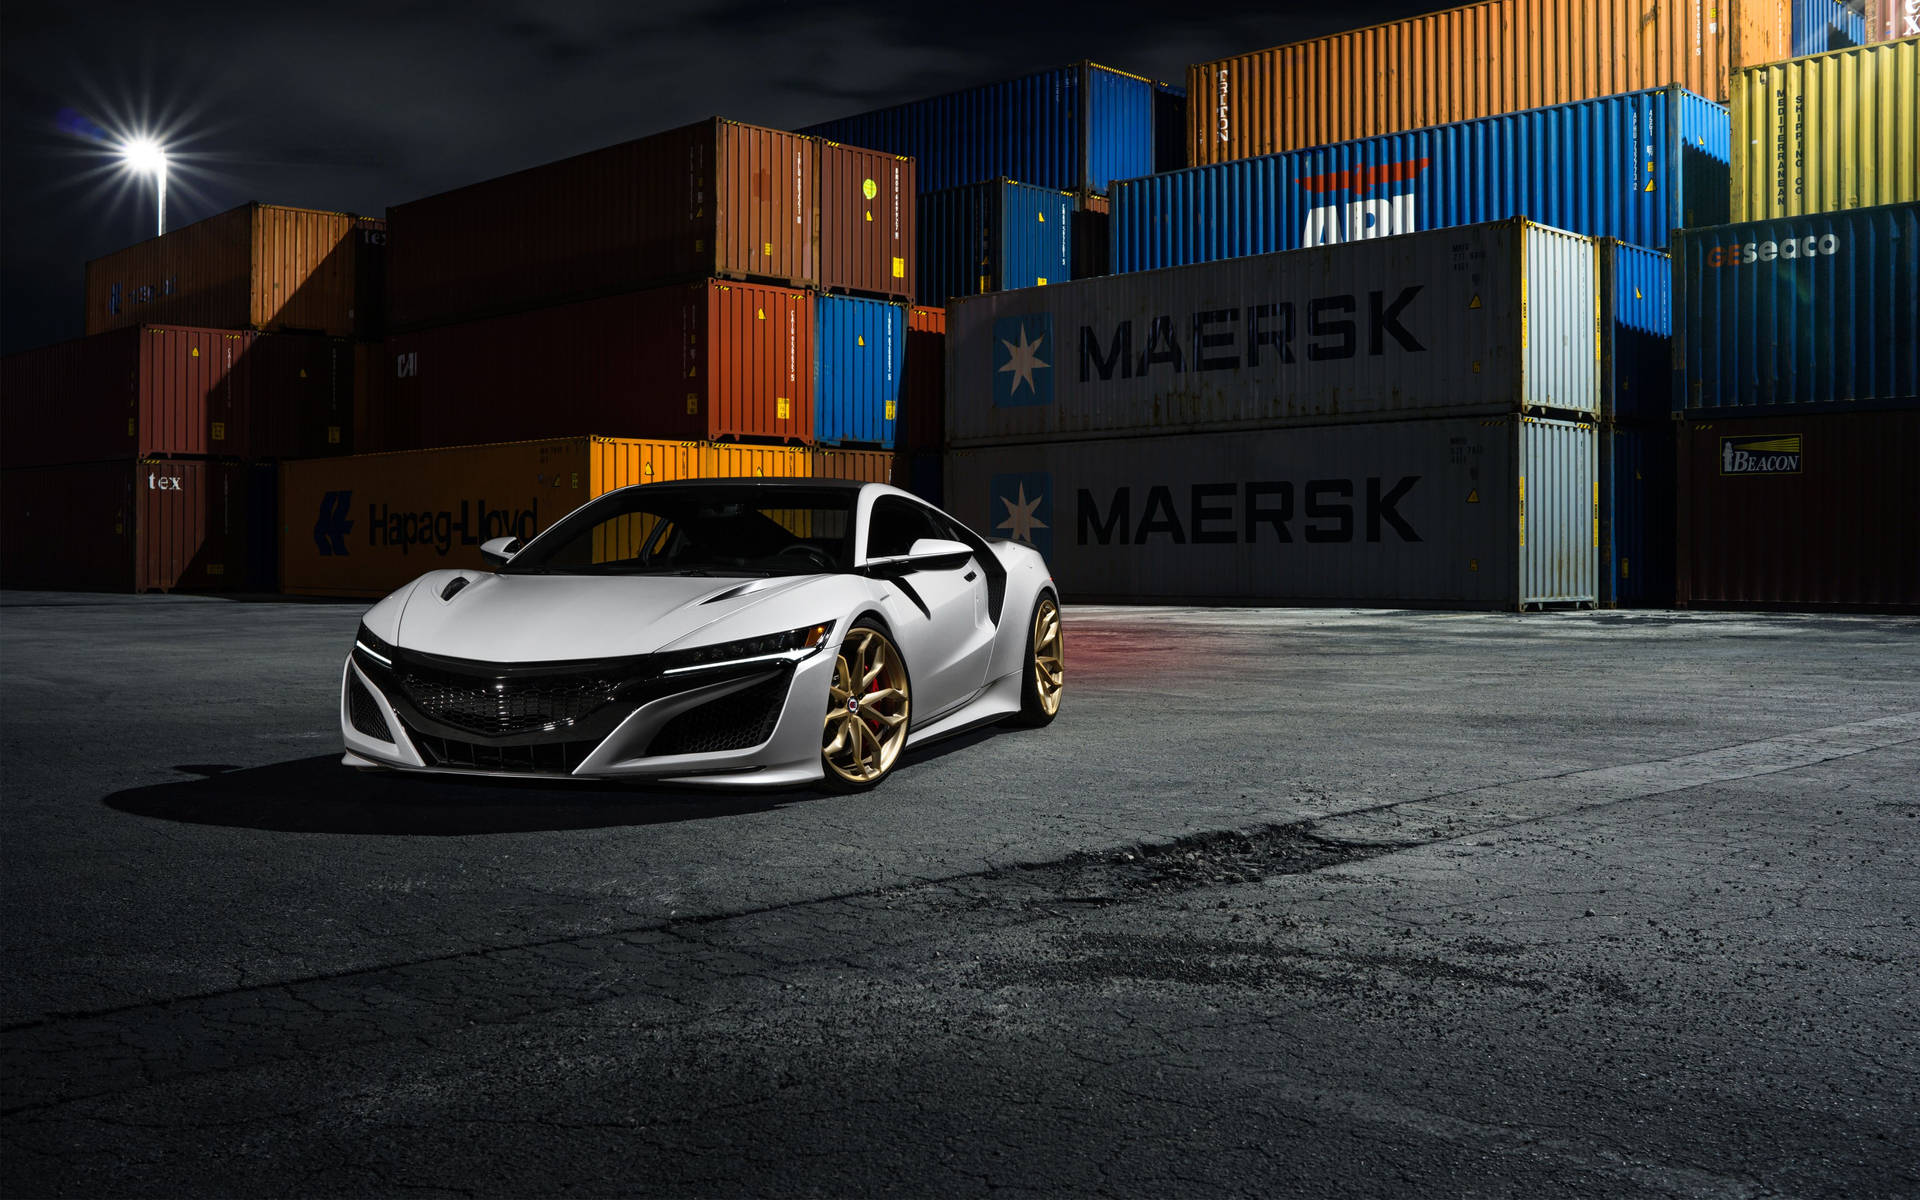 Acura Car And Metal Container Background